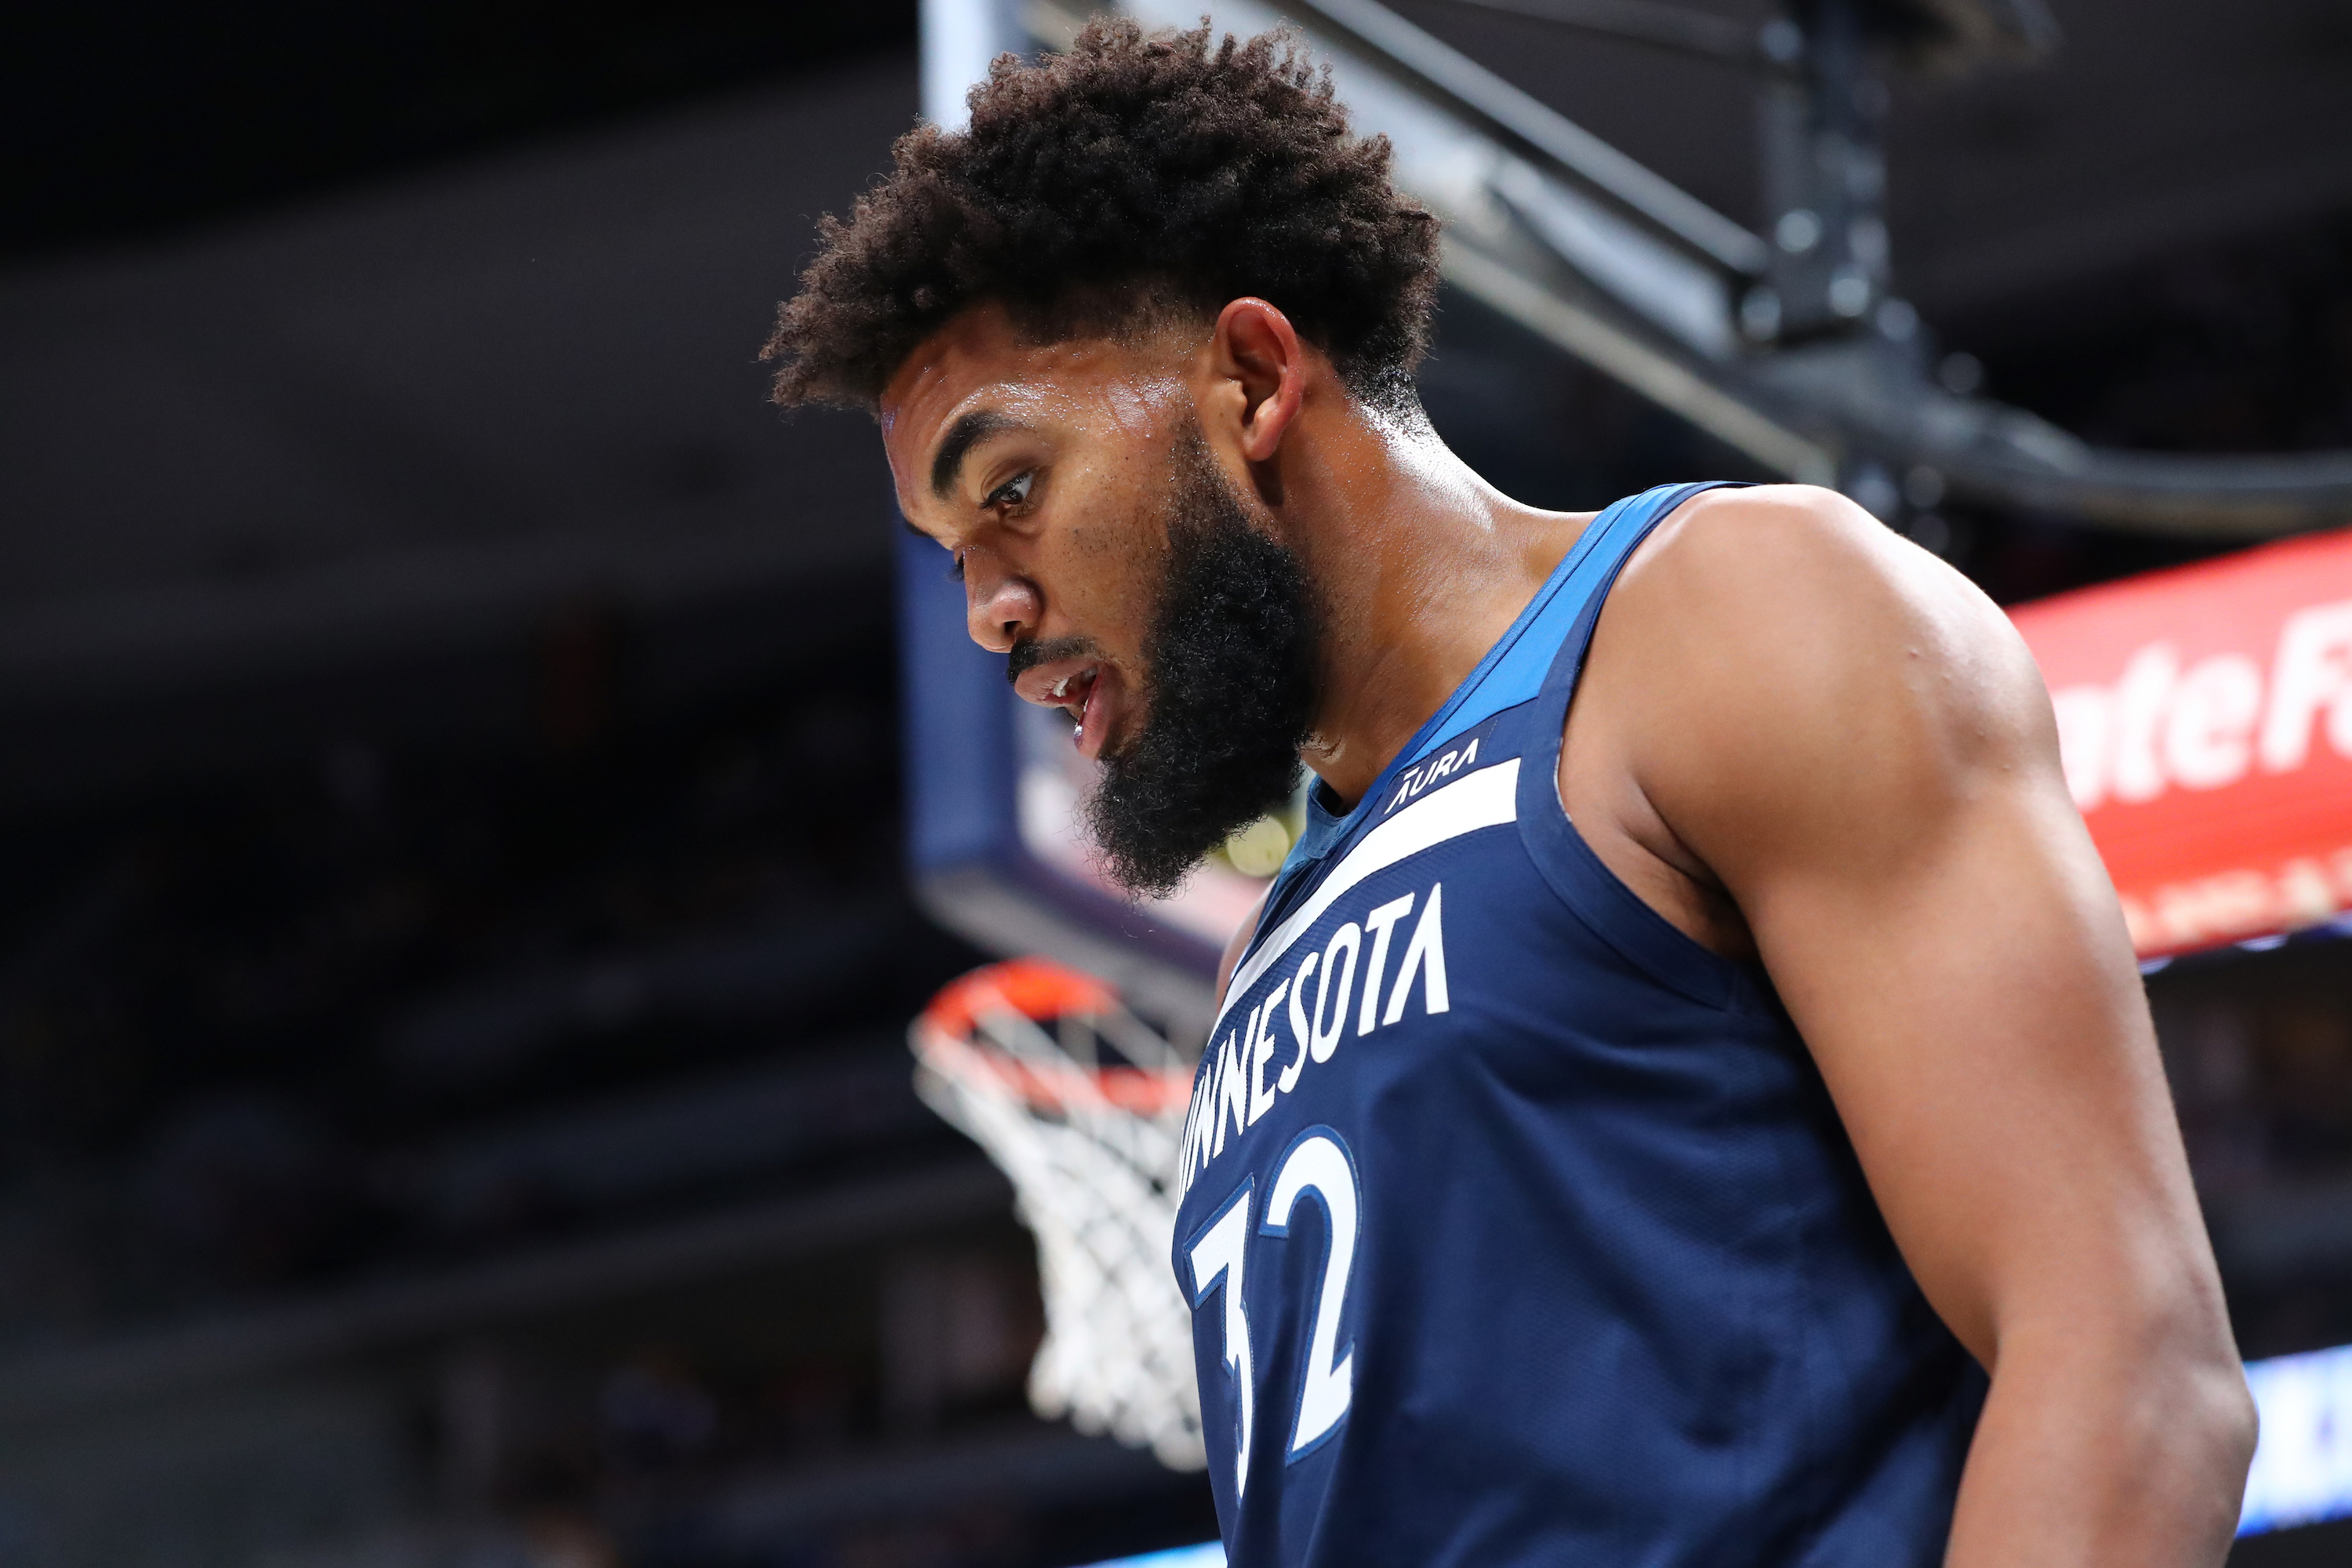 Timberwolves star Karl-Anthony Towns looks on during a preseason game